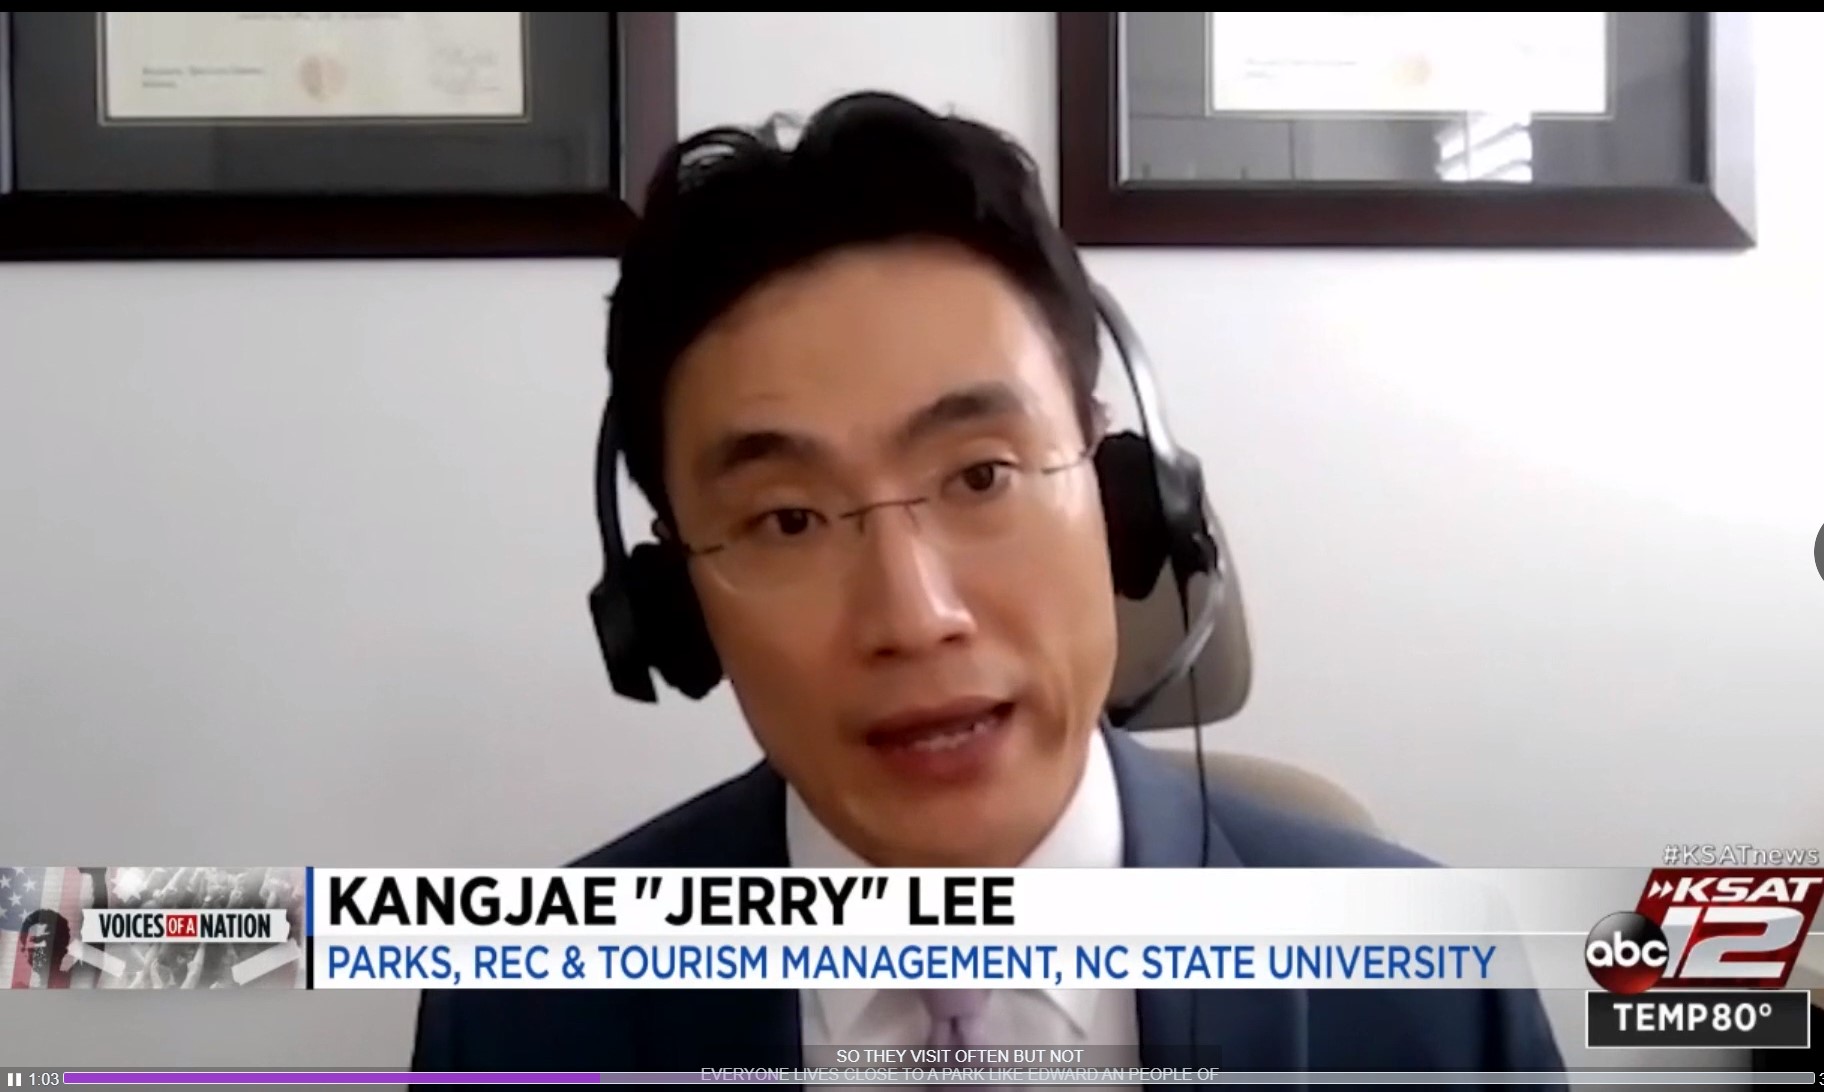 Dr. Lee speaks to the news - KangJae "Jerry" Lee - College of Natural Resources at NC State University